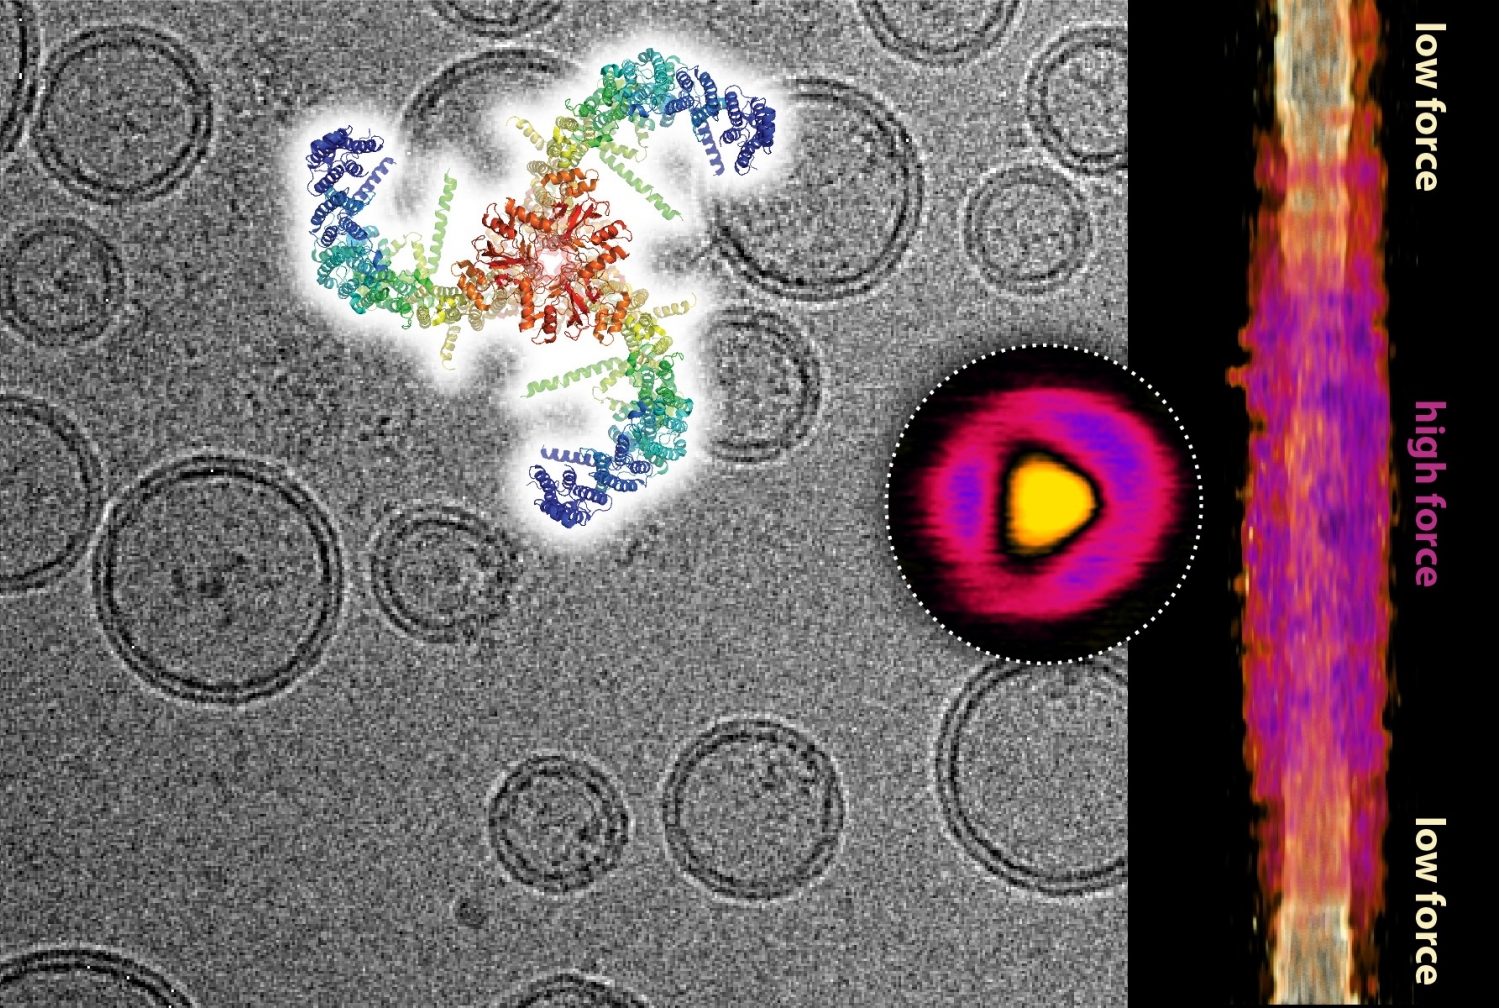 Composite of a cryo-electron microscopy image showing lipid vesicles with embedded Piezo channels, and the Piezo channel structure (top). Topography image of a single Piezo channel under force as recorded by high-speed atomic force microscopy (circle) and its lateral expansion in the membrane as a function of applied force (right). All images:Dr. Simon Scheuring.)